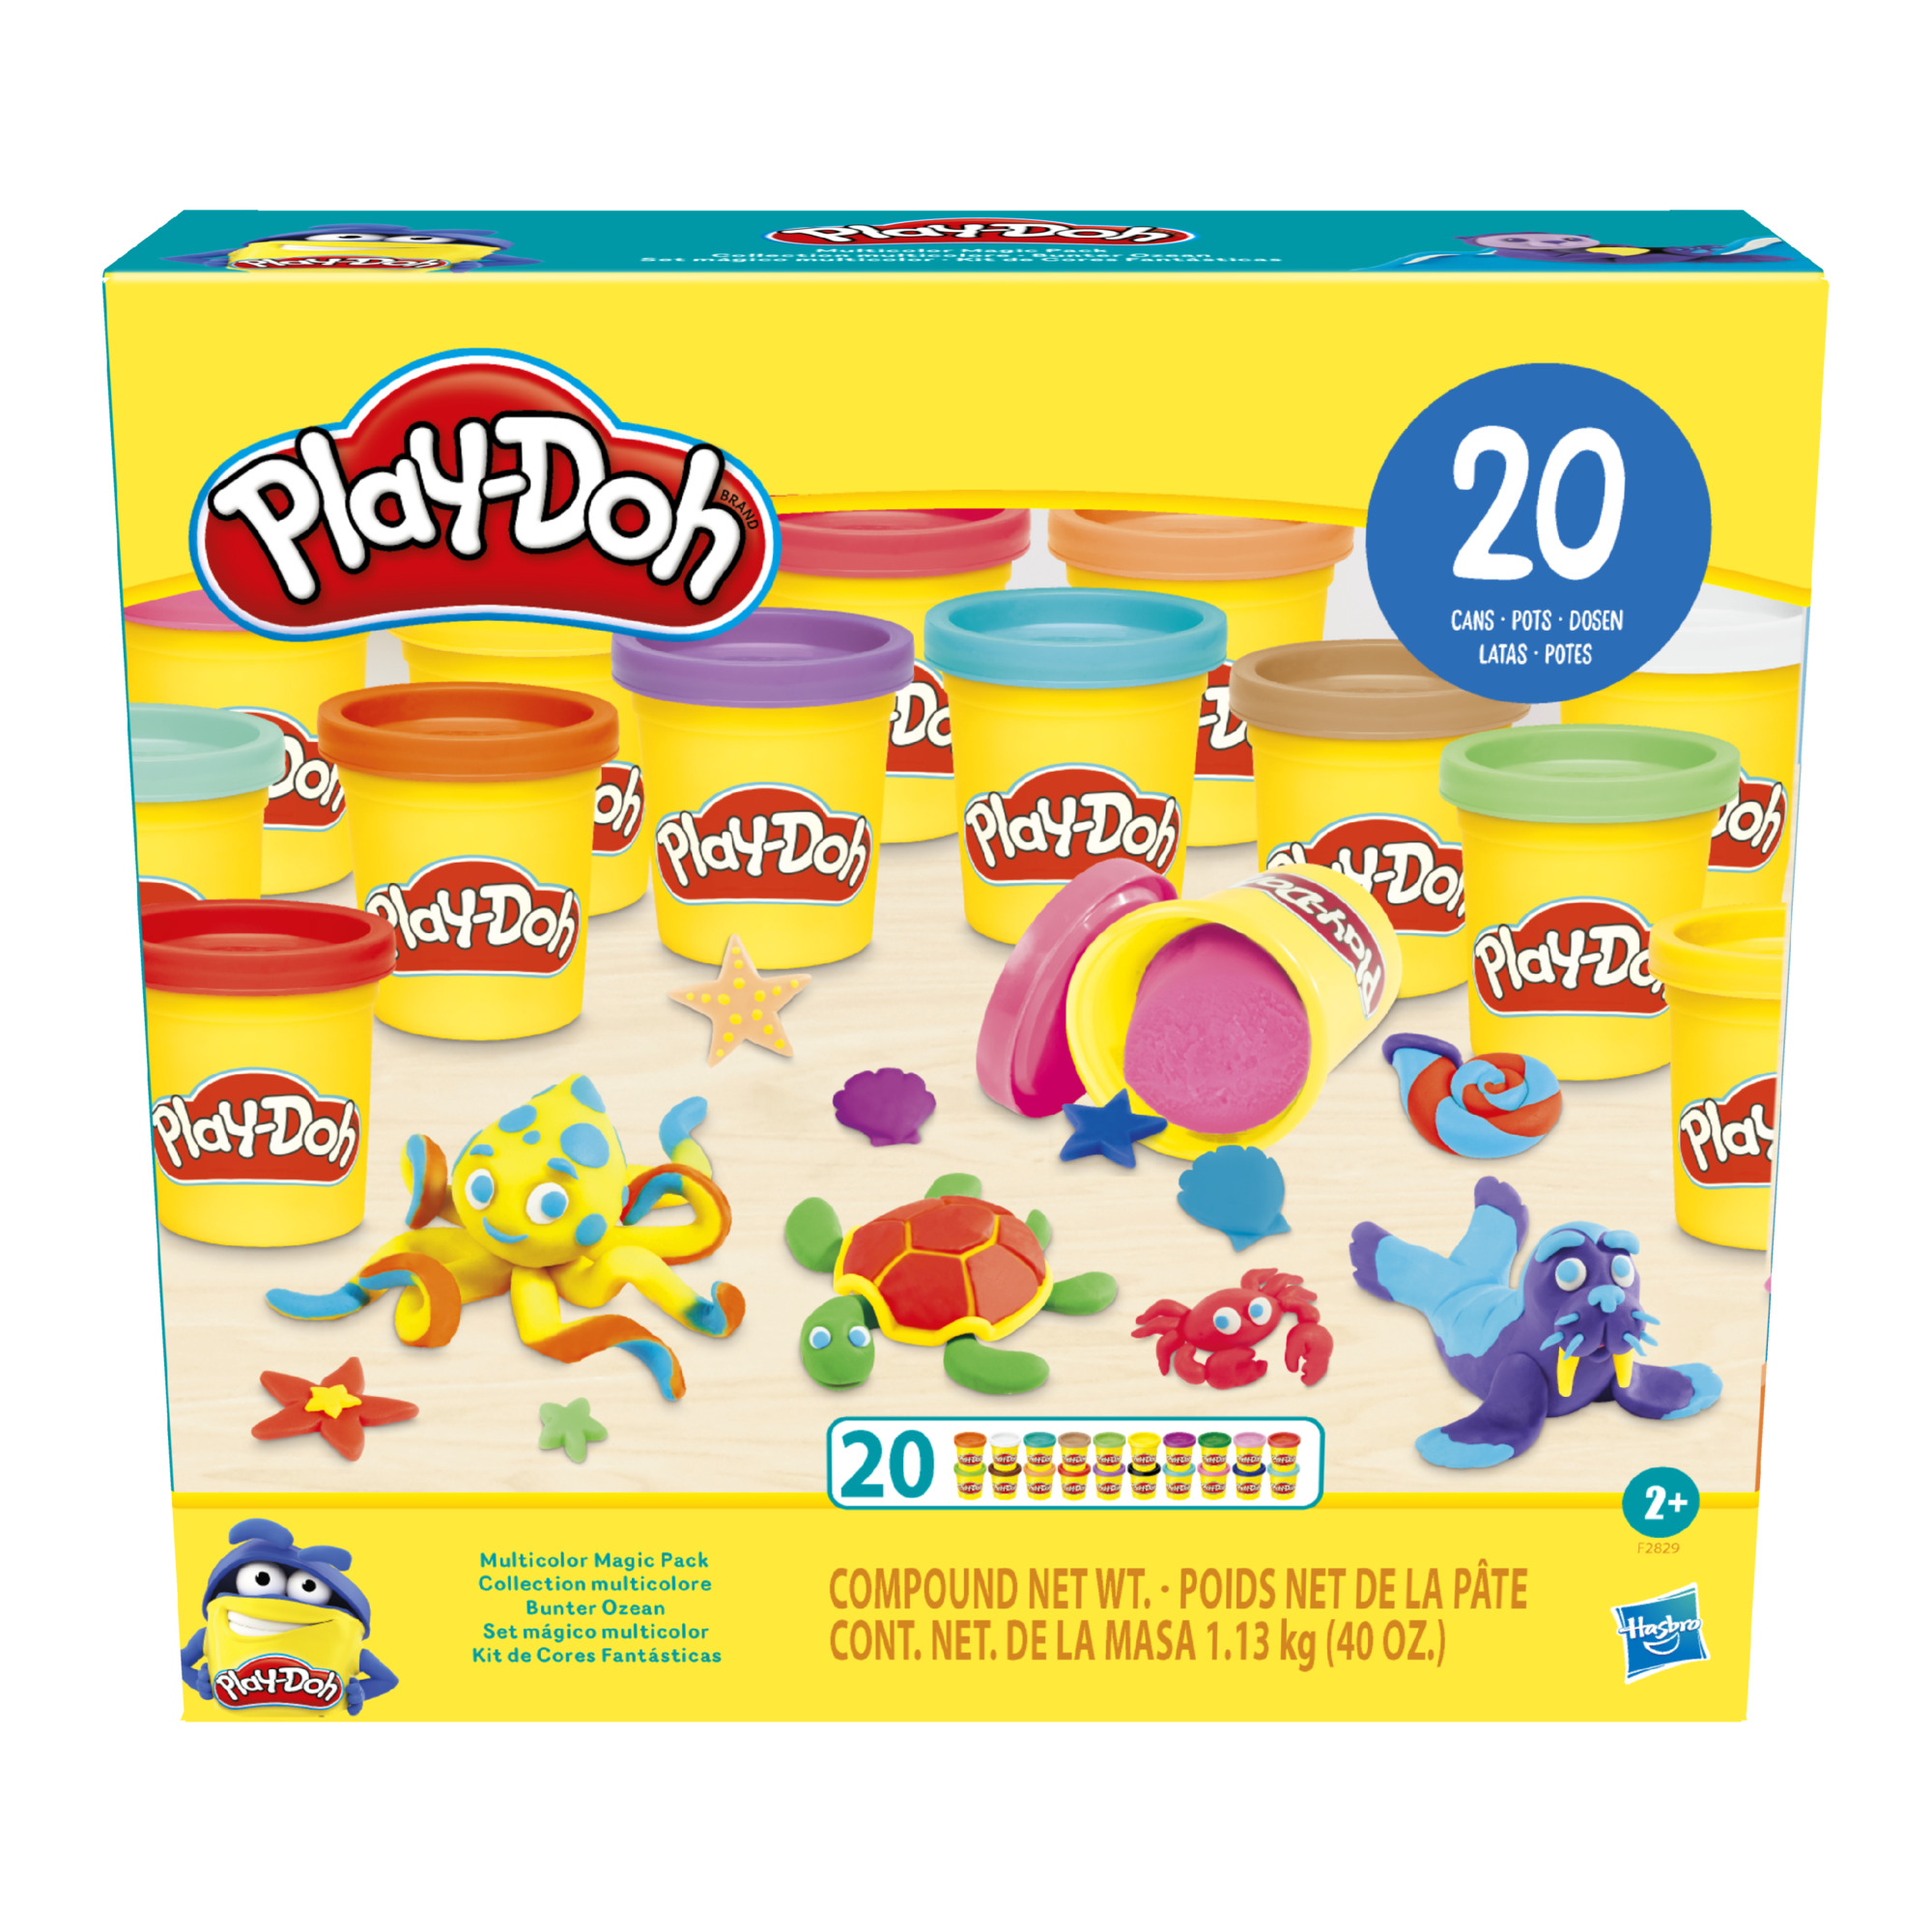 Play-Doh Multicolor Magic Play Dough Set - 20 Color (20 Piece), Only At Walmart - image 2 of 5